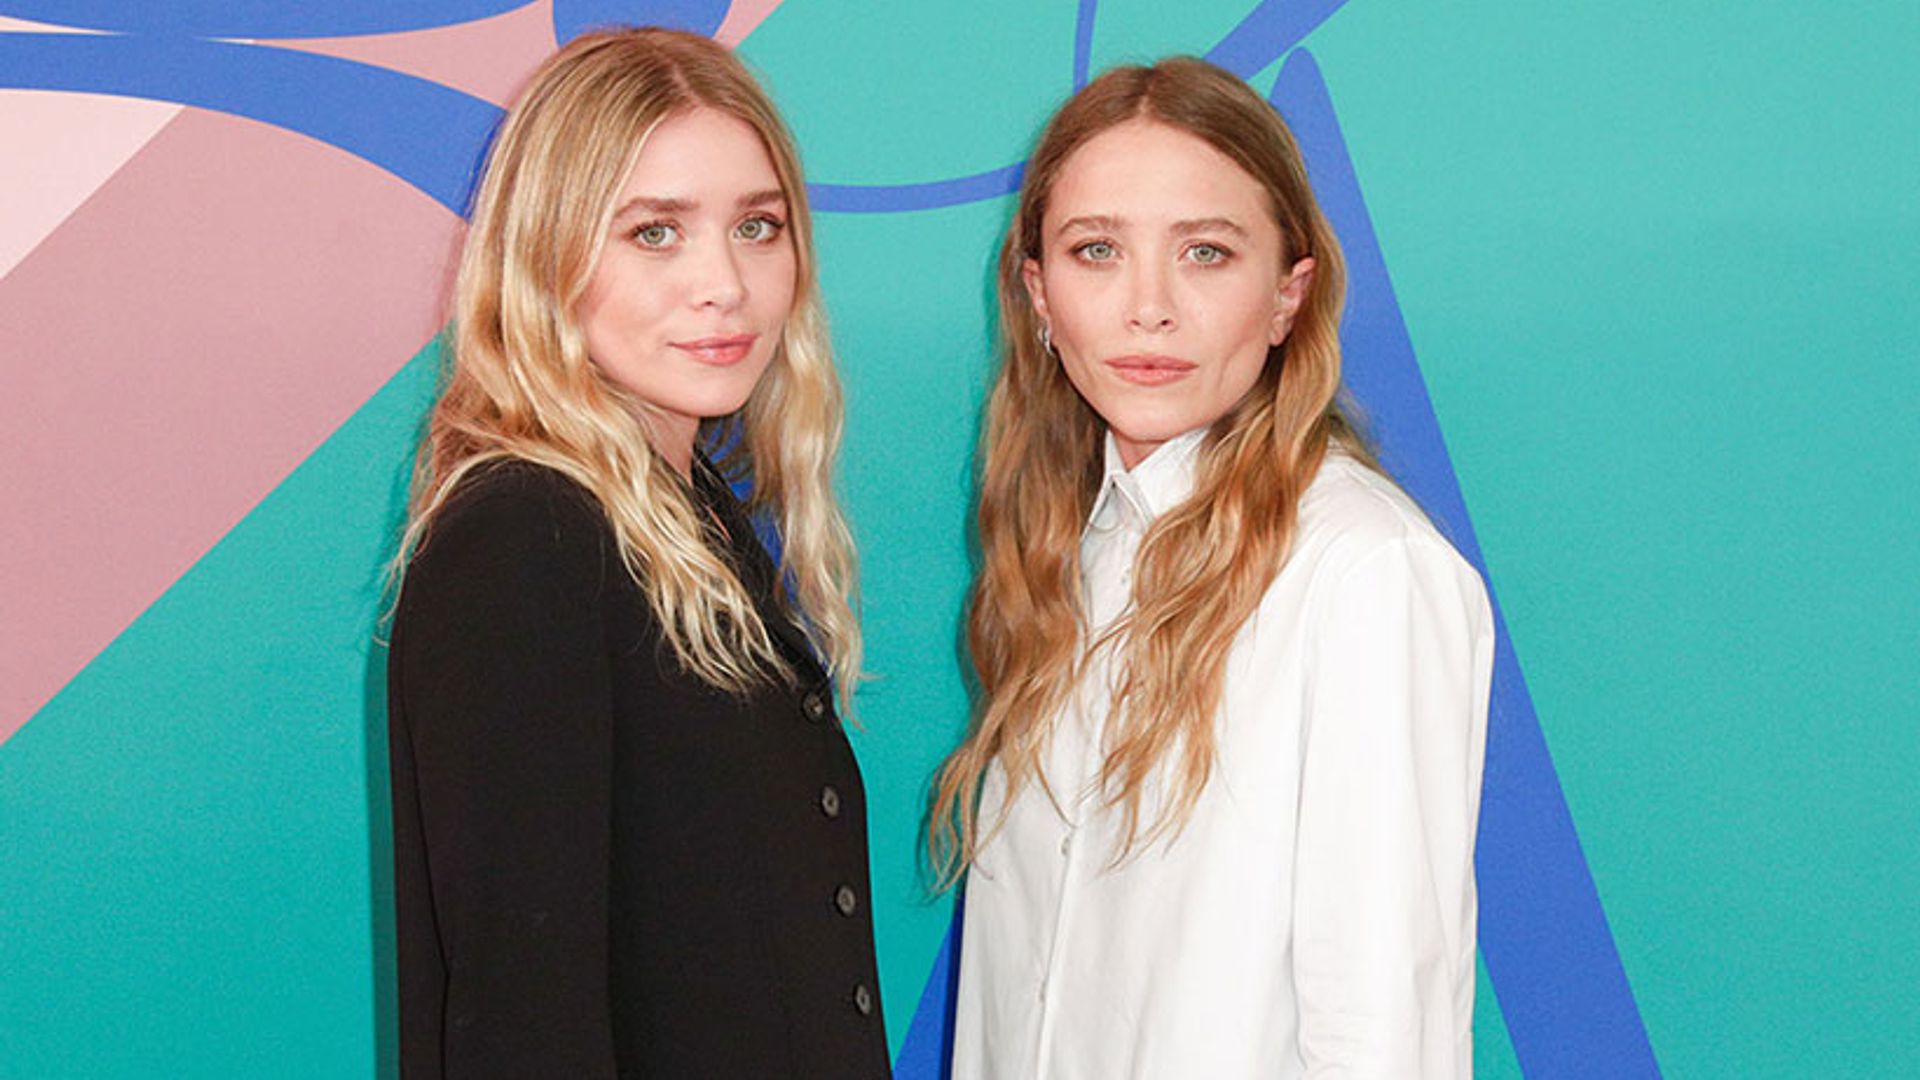 Mary-Kate and Ashley Olsen's fragrances are finally launching in the UK ...